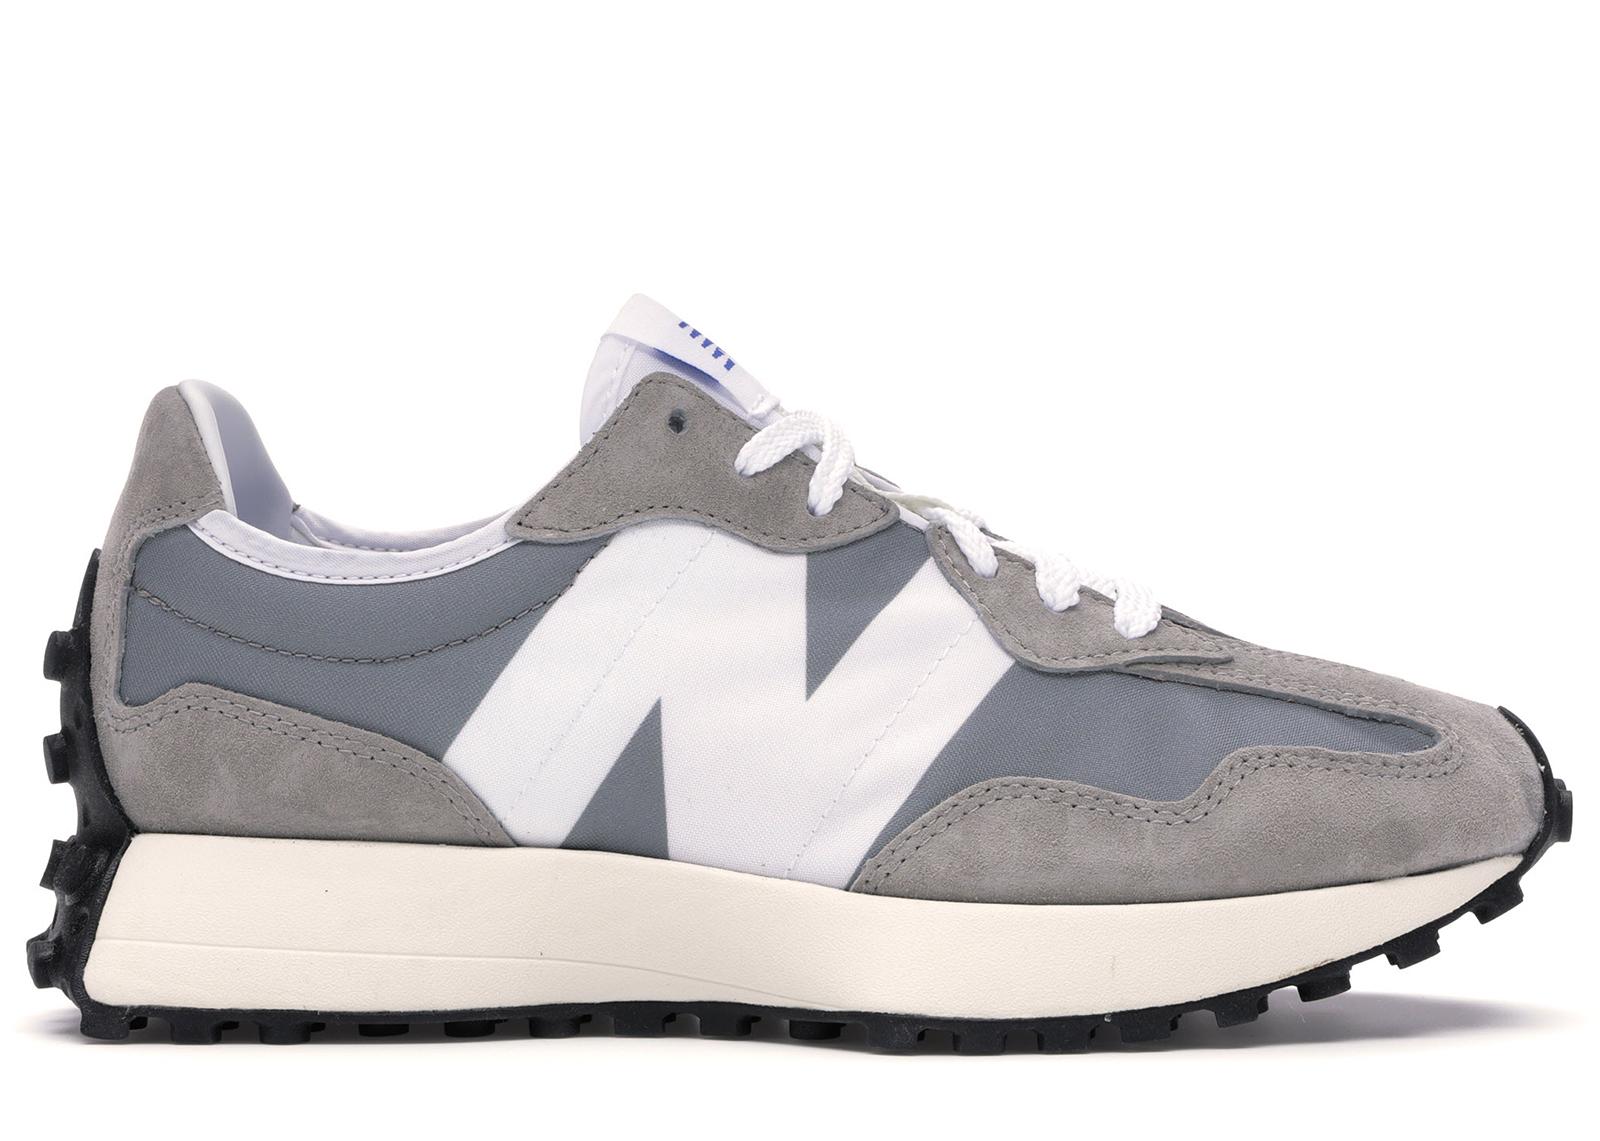 New Balance 327 Grey in Grey/White (Gray) for Men - Lyst